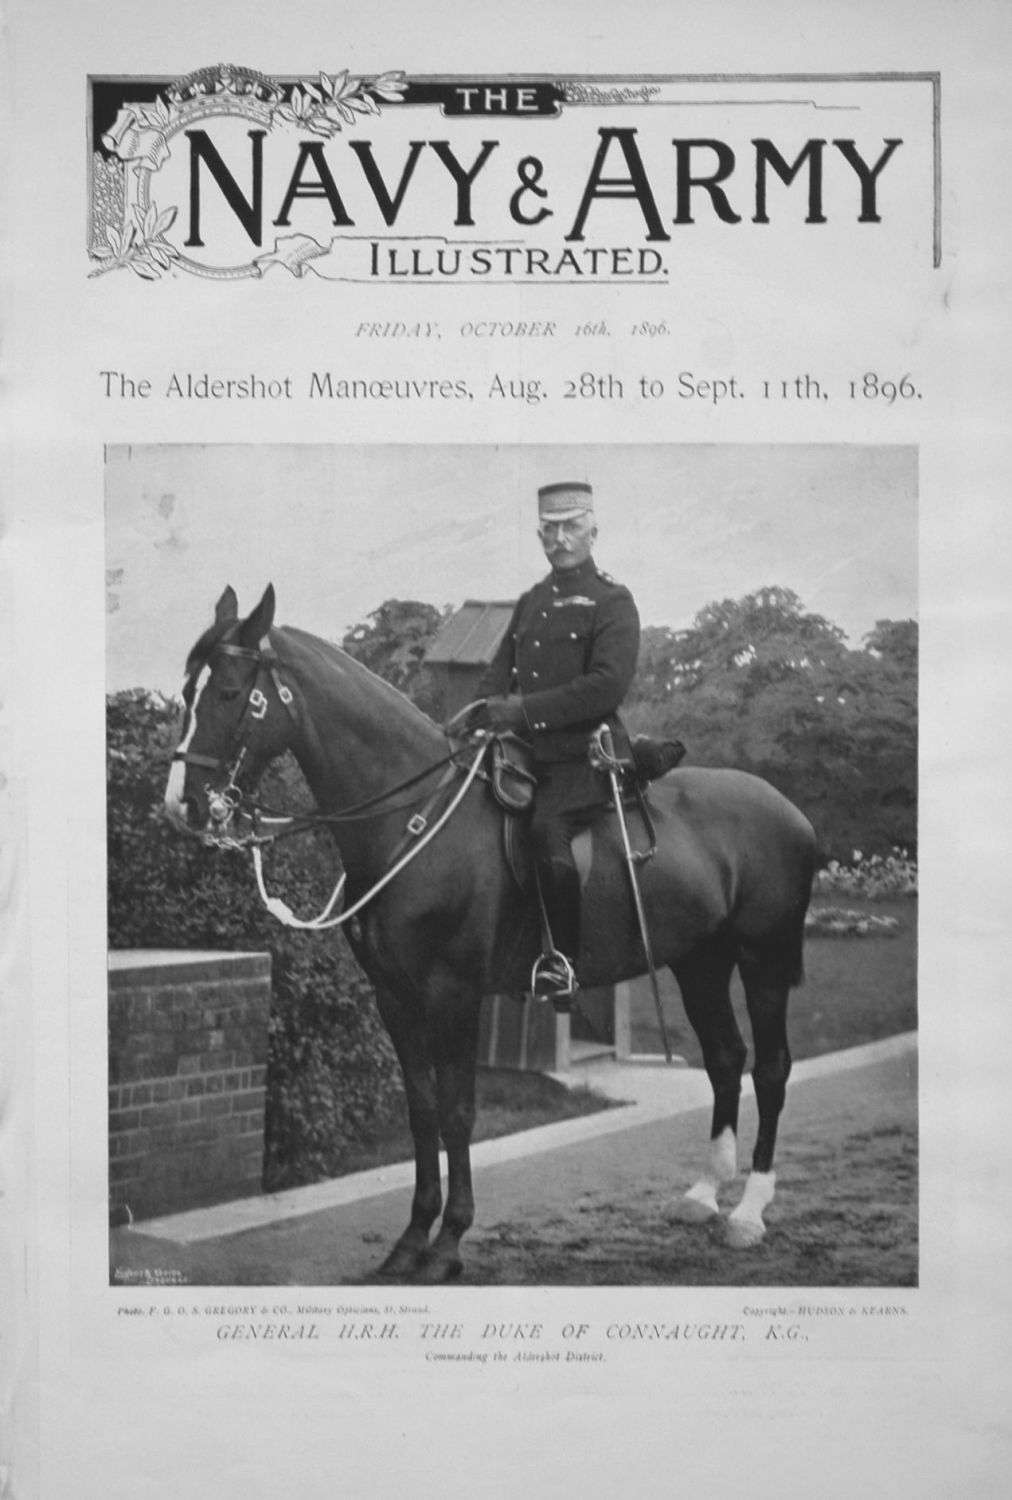 Navy & Army Illustrated, October 16th 1896. (Special No.)